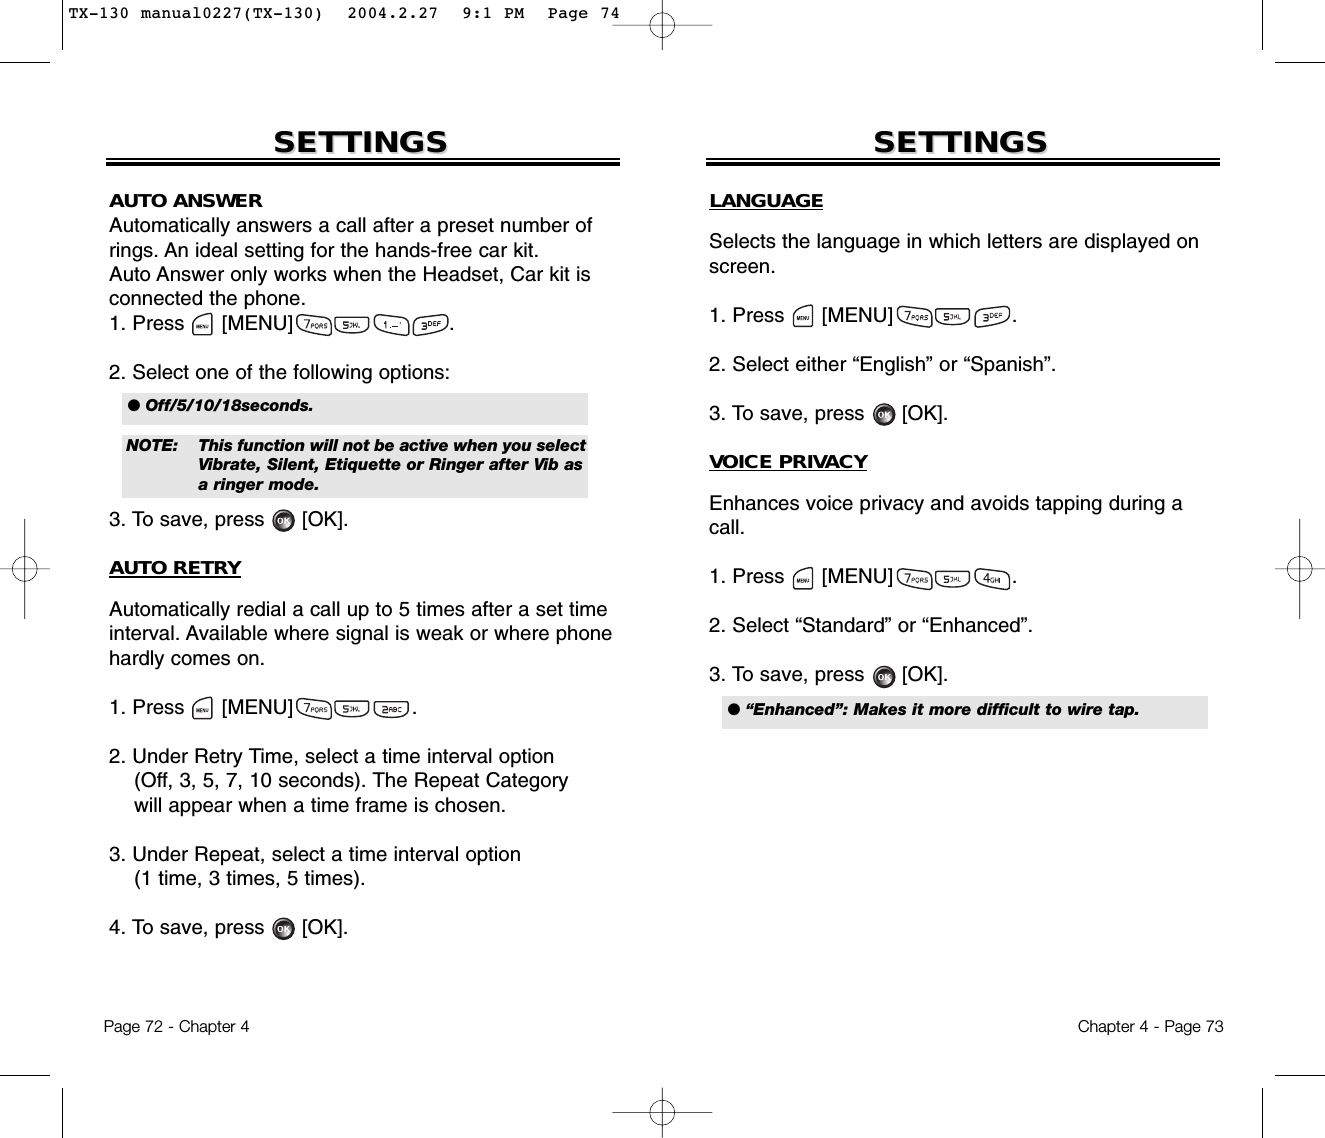 Chapter 4 - Page 73Page 72 - Chapter 4SETTINGSSETTINGS SETTINGSSETTINGSAUTO ANSWERAutomatically answers a call after a preset number ofrings. An ideal setting for the hands-free car kit. Auto Answer only works when the Headset, Car kit isconnected the phone.1. Press      [MENU]                         .2. Select one of the following options:3. To save, press [OK].AUTO RETRYAutomatically redial a call up to 5 times after a set timeinterval. Available where signal is weak or where phonehardly comes on.1. Press      [MENU]                   .2. Under Retry Time, select a time interval option(Off, 3, 5, 7, 10 seconds). The Repeat Categorywill appear when a time frame is chosen.3. Under Repeat, select a time interval option(1 time, 3 times, 5 times).4. To save, press      [OK].● Off/5/10/18seconds.NOTE: This function will not be active when you selectVibrate, Silent, Etiquette or Ringer after Vib as a ringer mode.LANGUAGESelects the language in which letters are displayed onscreen.1. Press      [MENU]                   .2. Select either “English” or “Spanish”.3. To save, press      [OK].VOICE PRIVACYEnhances voice privacy and avoids tapping during acall.1. Press      [MENU]                   .2. Select “Standard” or “Enhanced”.3. To save, press      [OK].● “Enhanced”: Makes it more difficult to wire tap.TX-130 manual0227(TX-130)  2004.2.27  9:1 PM  Page 74